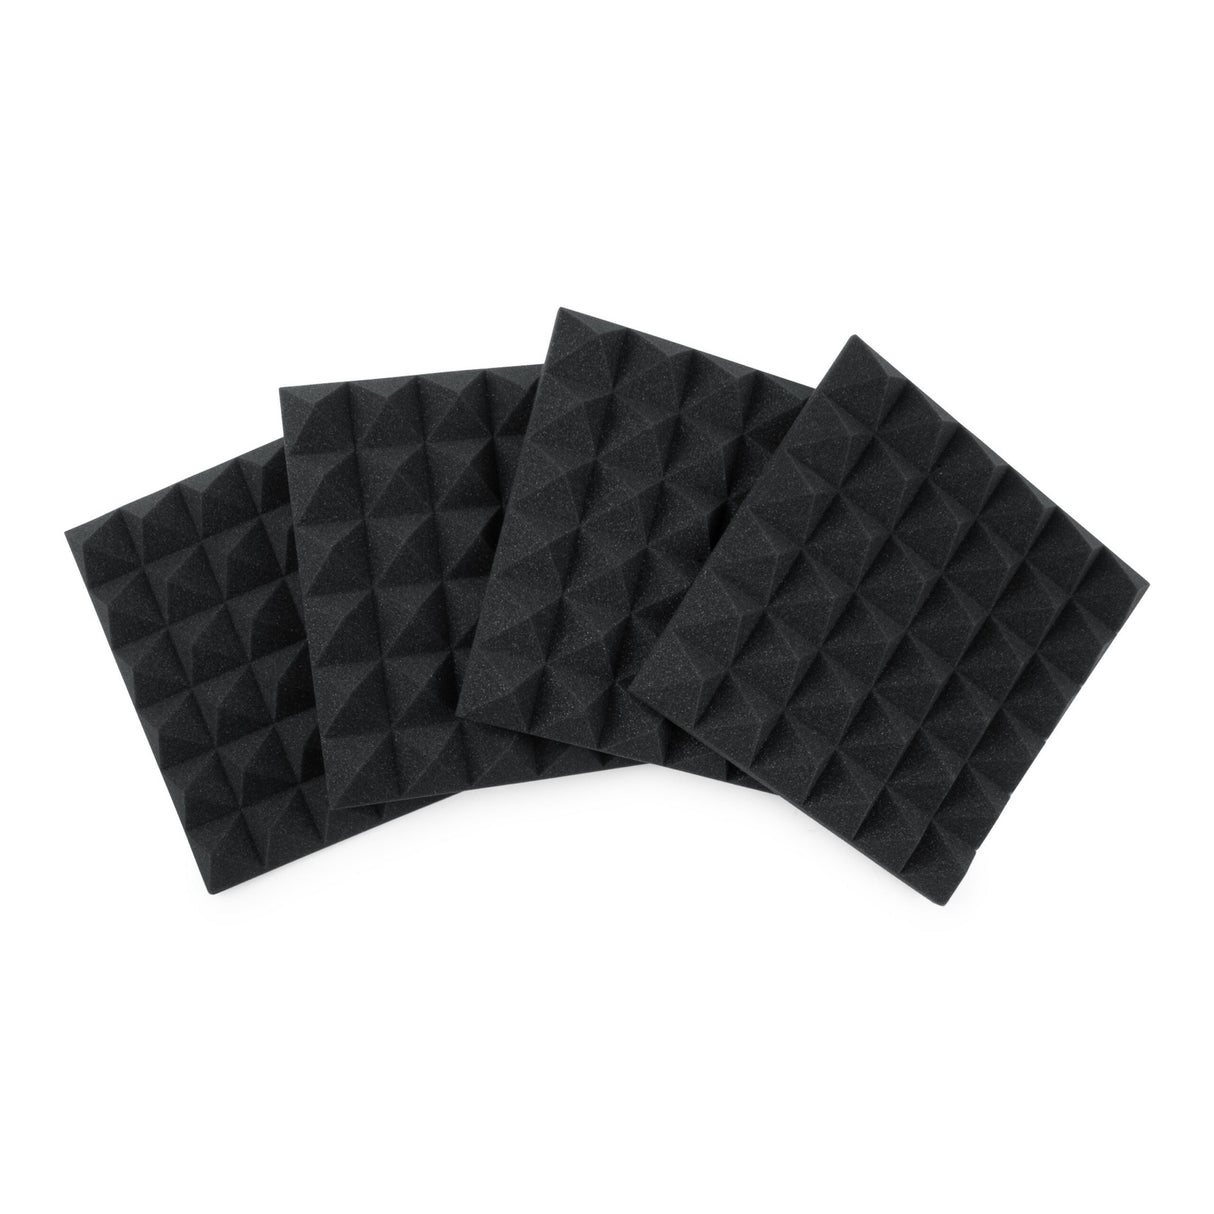 Gator GFW-ACPNL1212PCHA-4PK 4 Pack of Charcoal Acoustic Pyramid Panel, 12 x 12 Inches